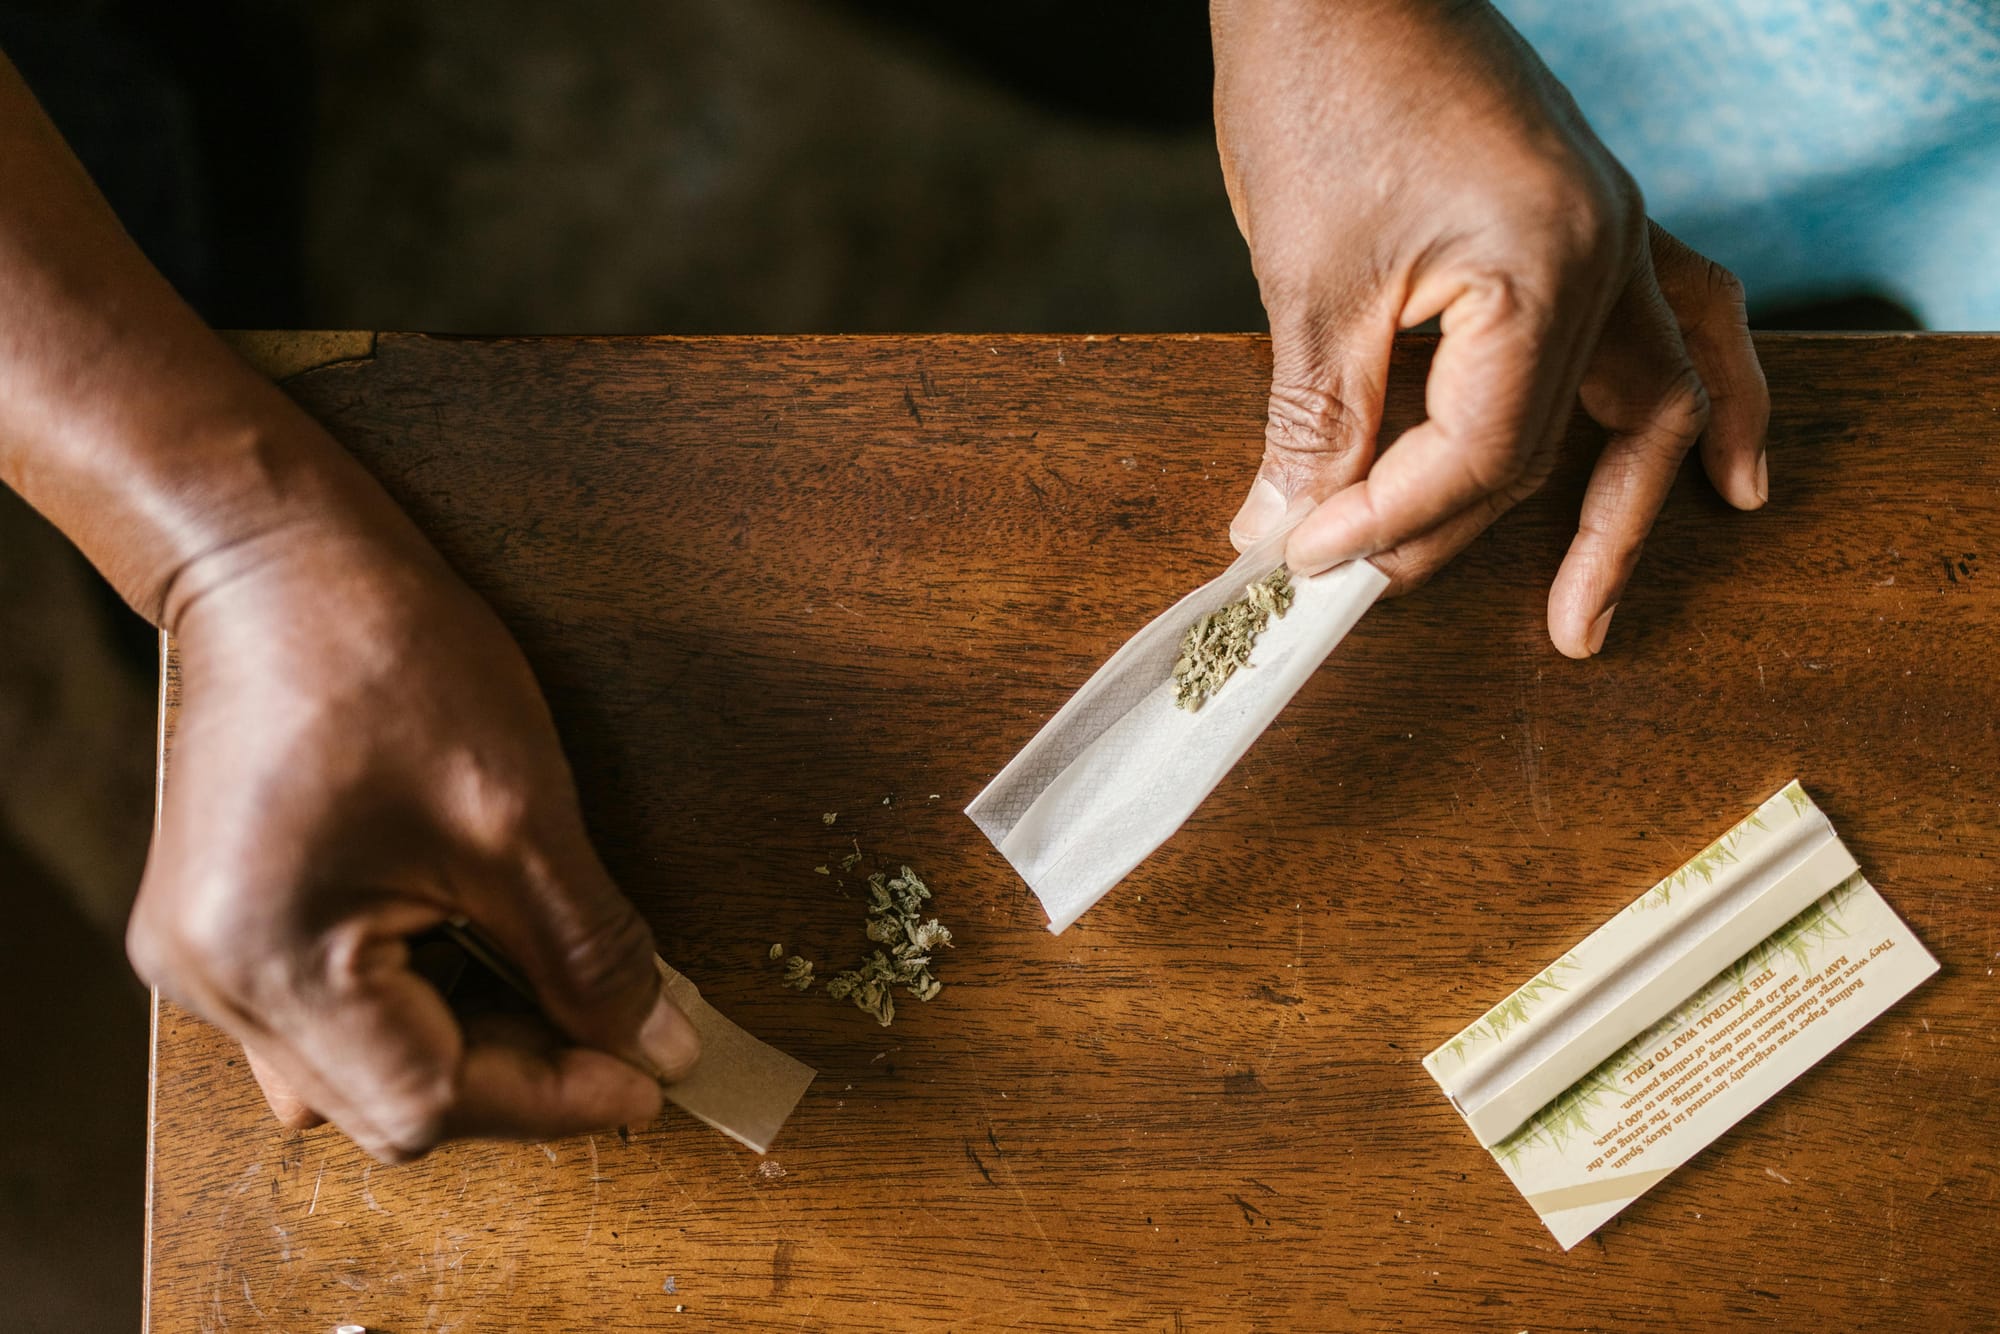 Photo of a person's hands rolling a joint on a wooden table.